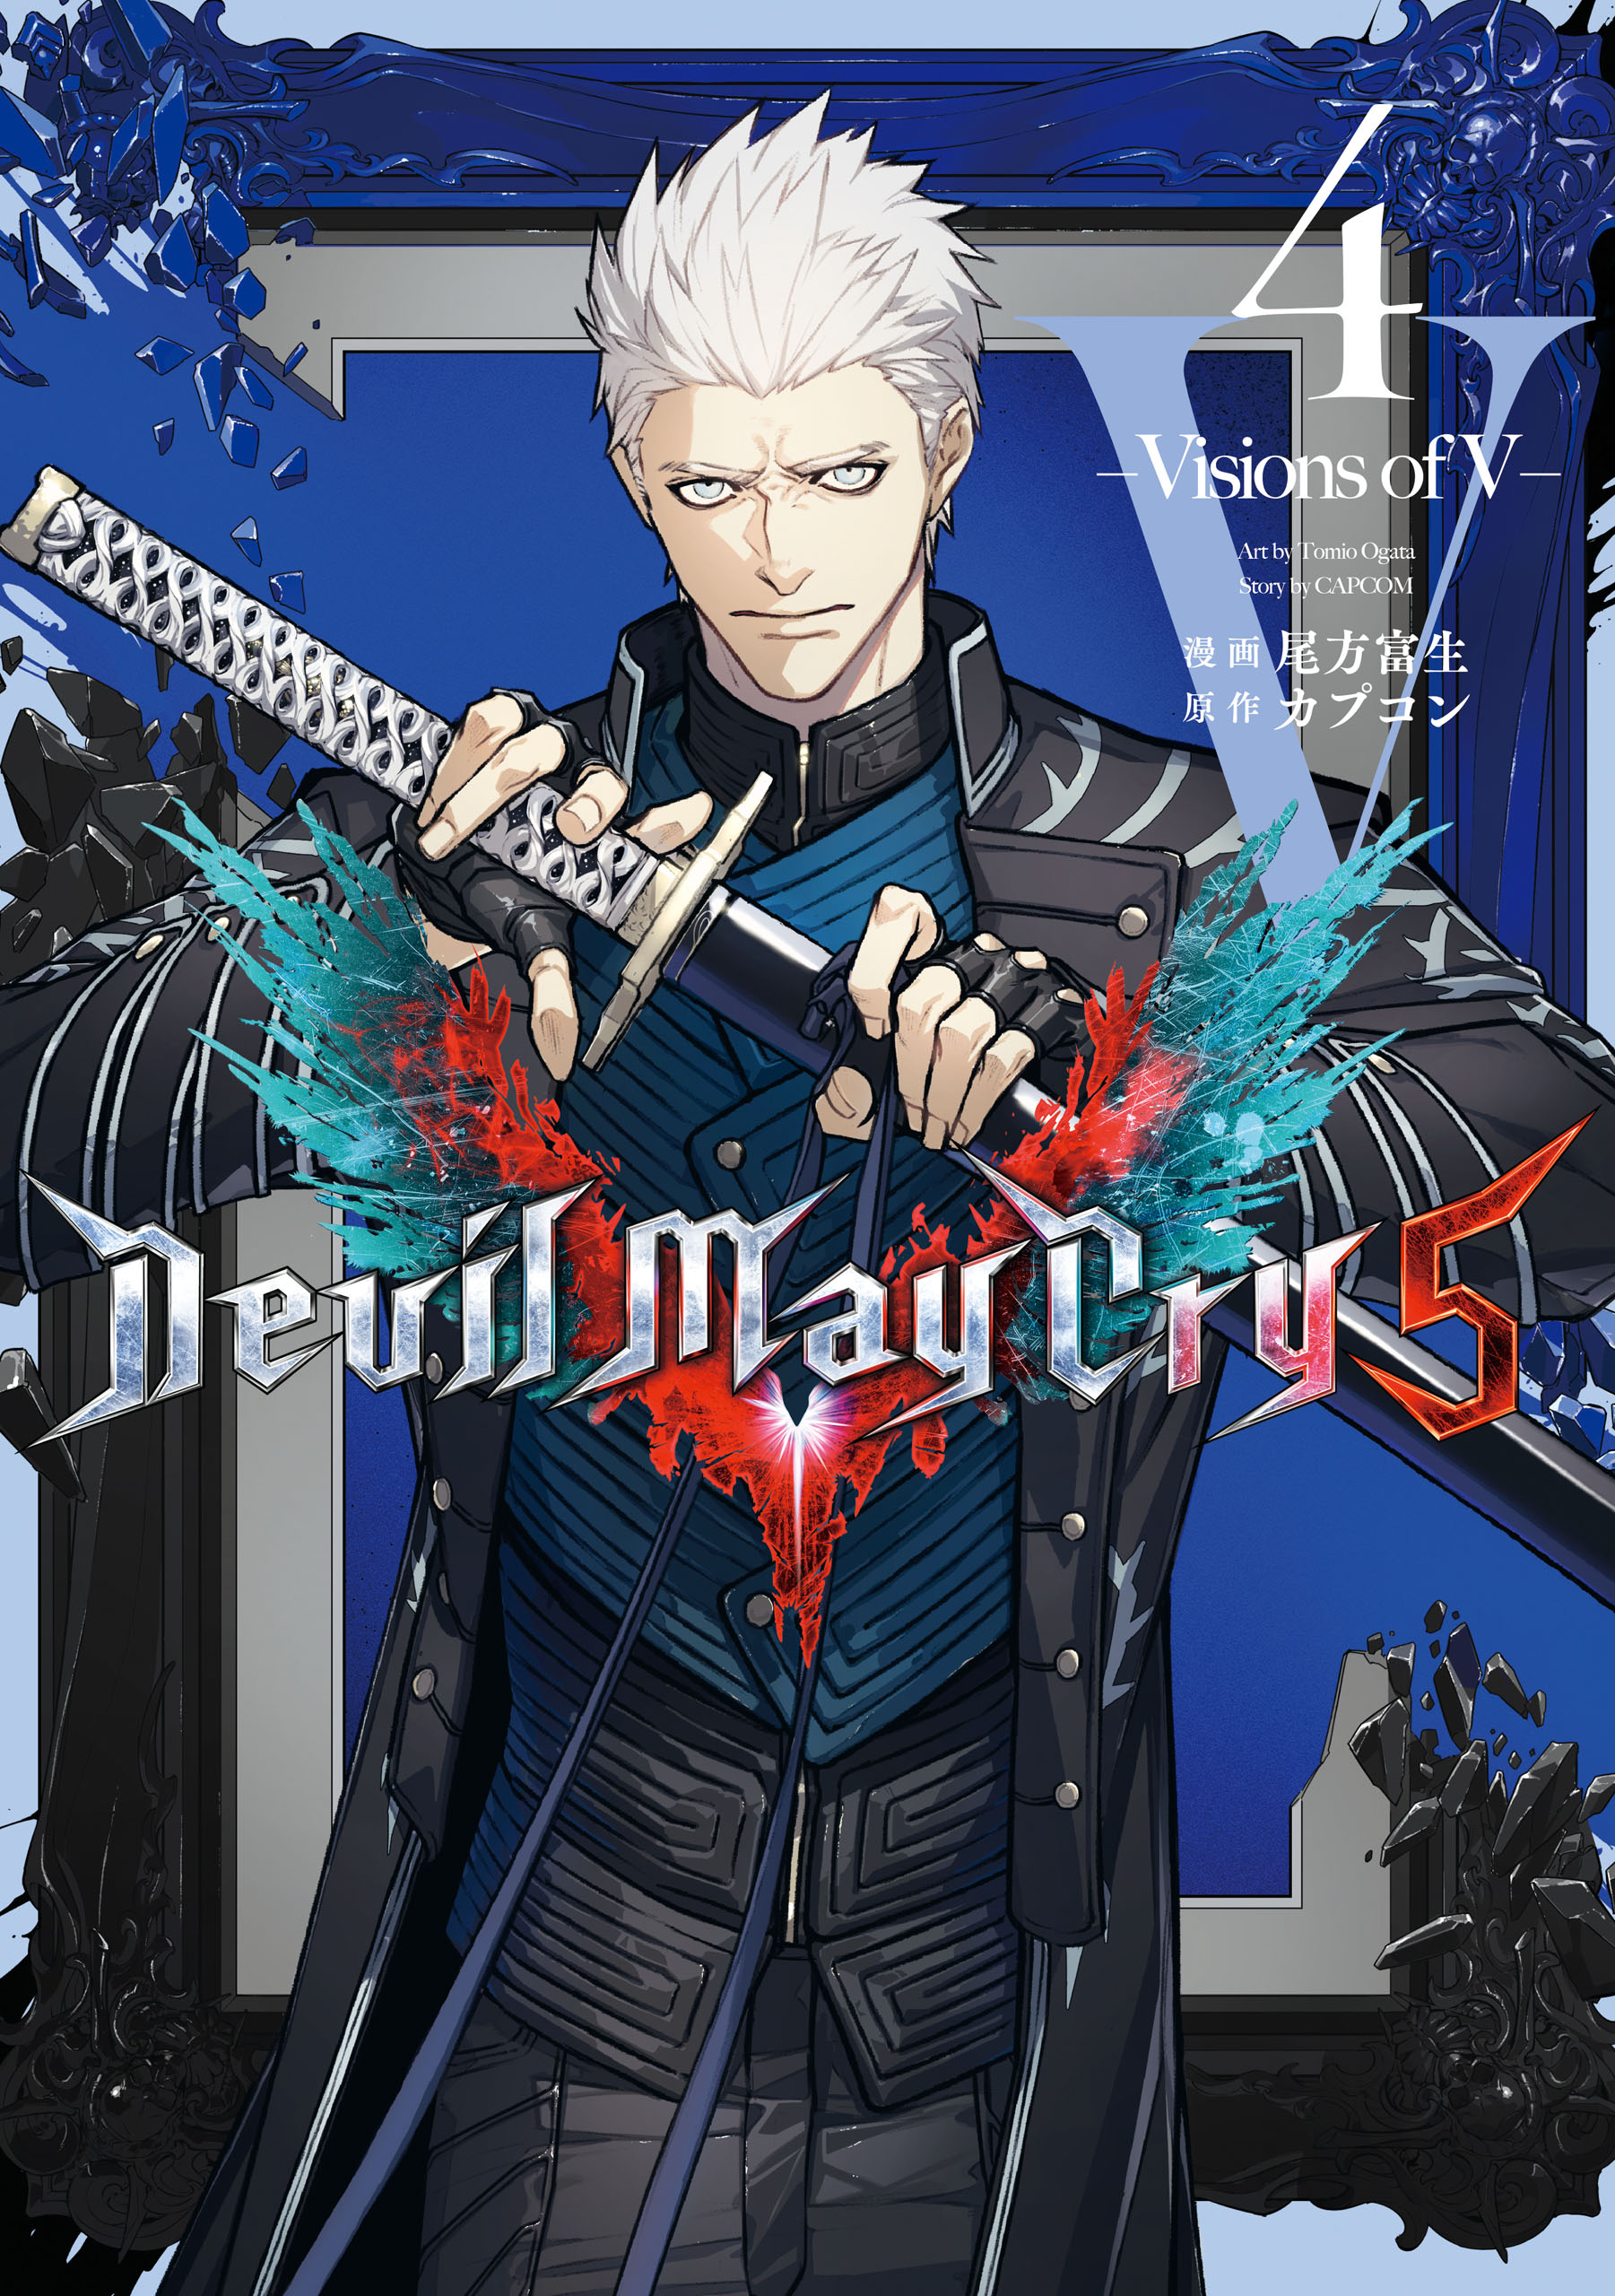 Devil May Cry 5 Visions of Ⅴ- 全5巻 - 全巻セット